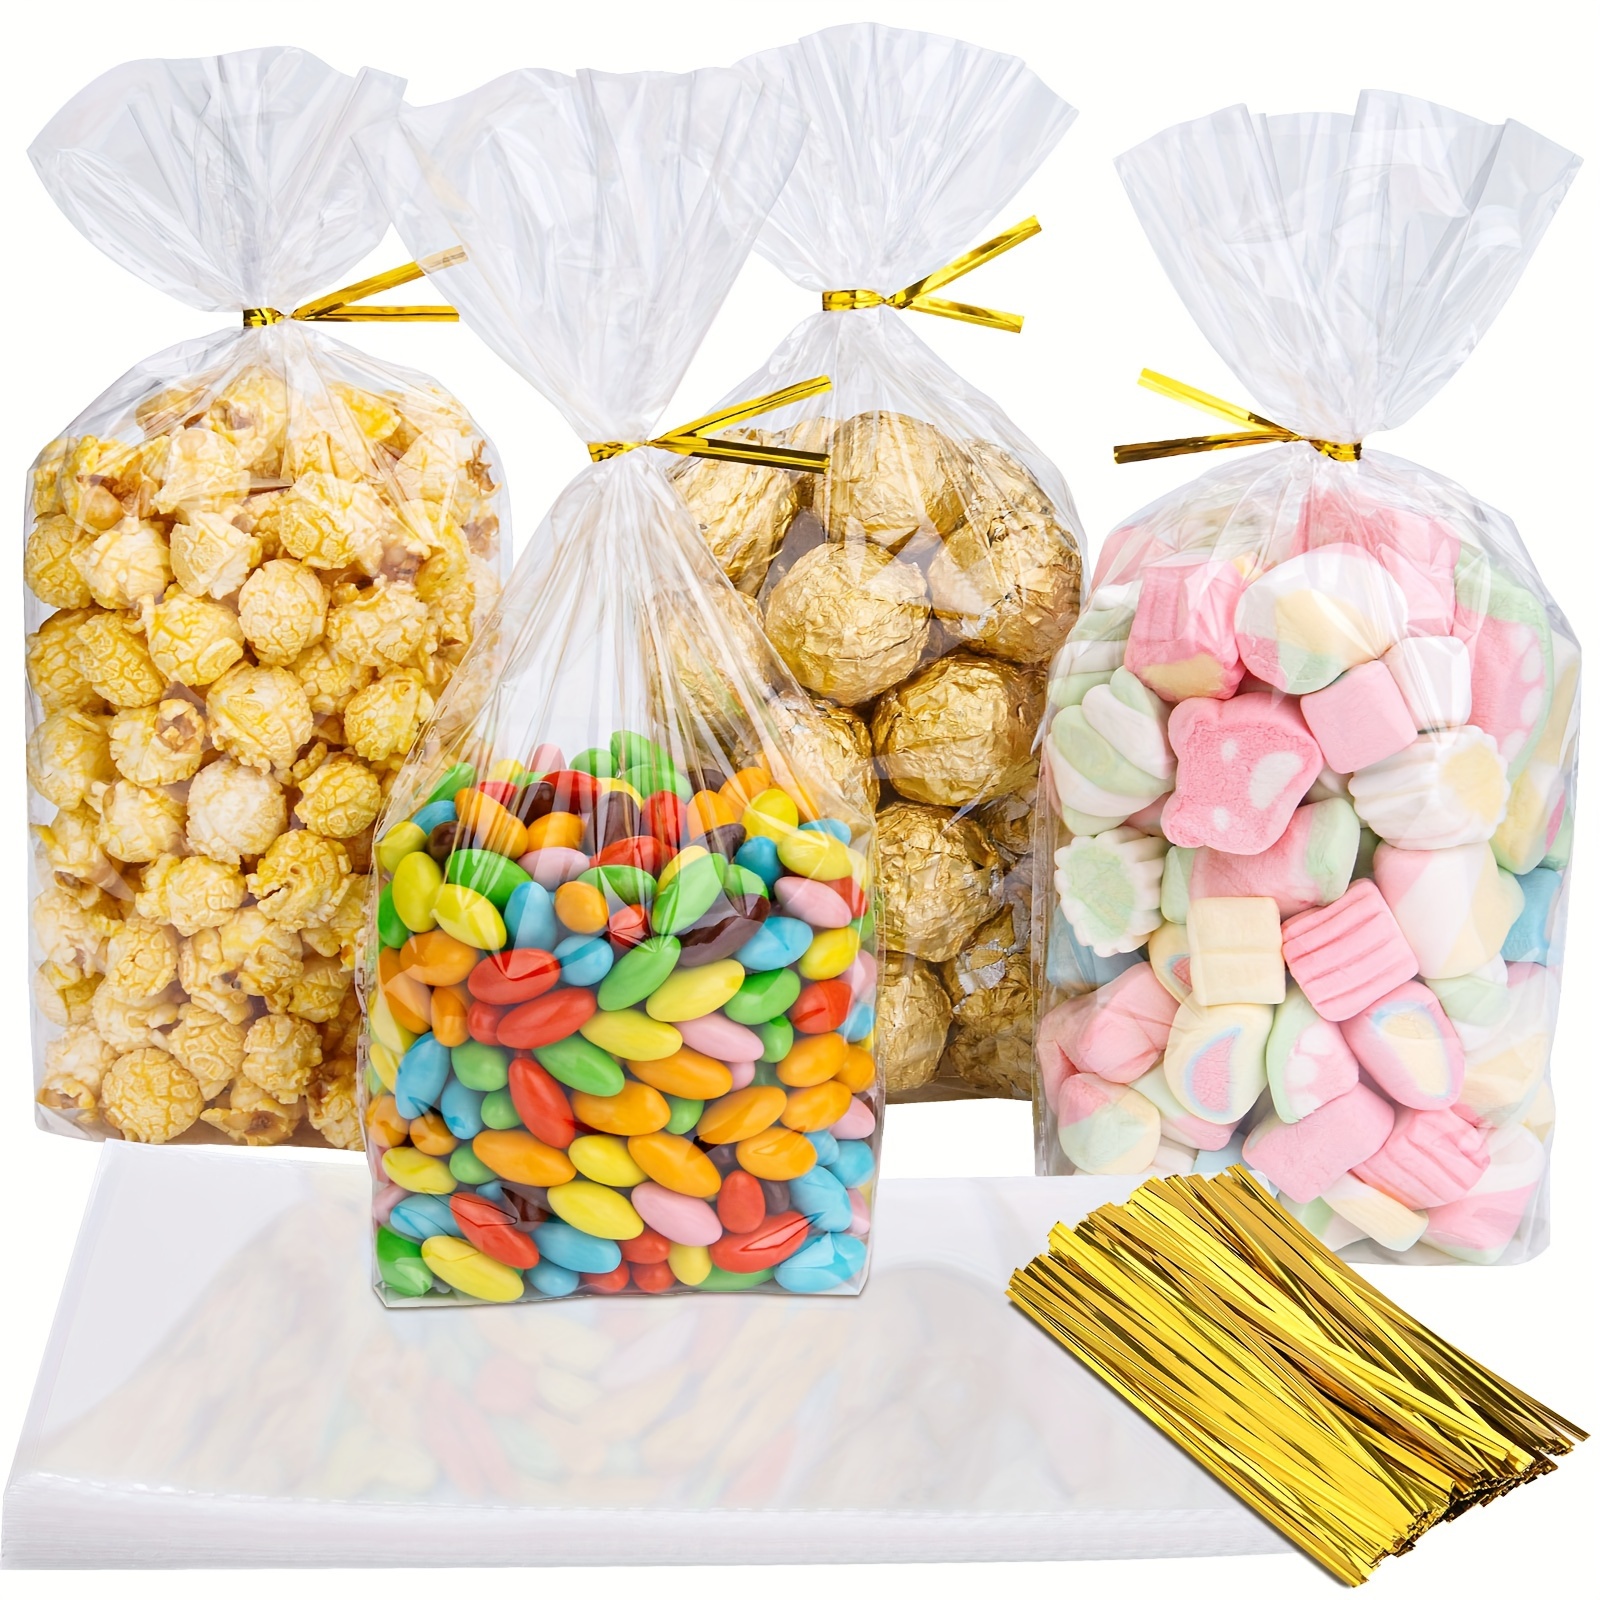 Cellophane Bags For Baskets Cellophane Gift Bags For Wine Bottles, Small  Baskets, Mugs And Gifts Clear Cellophane Bags Basket Bags Cello Gift Bags